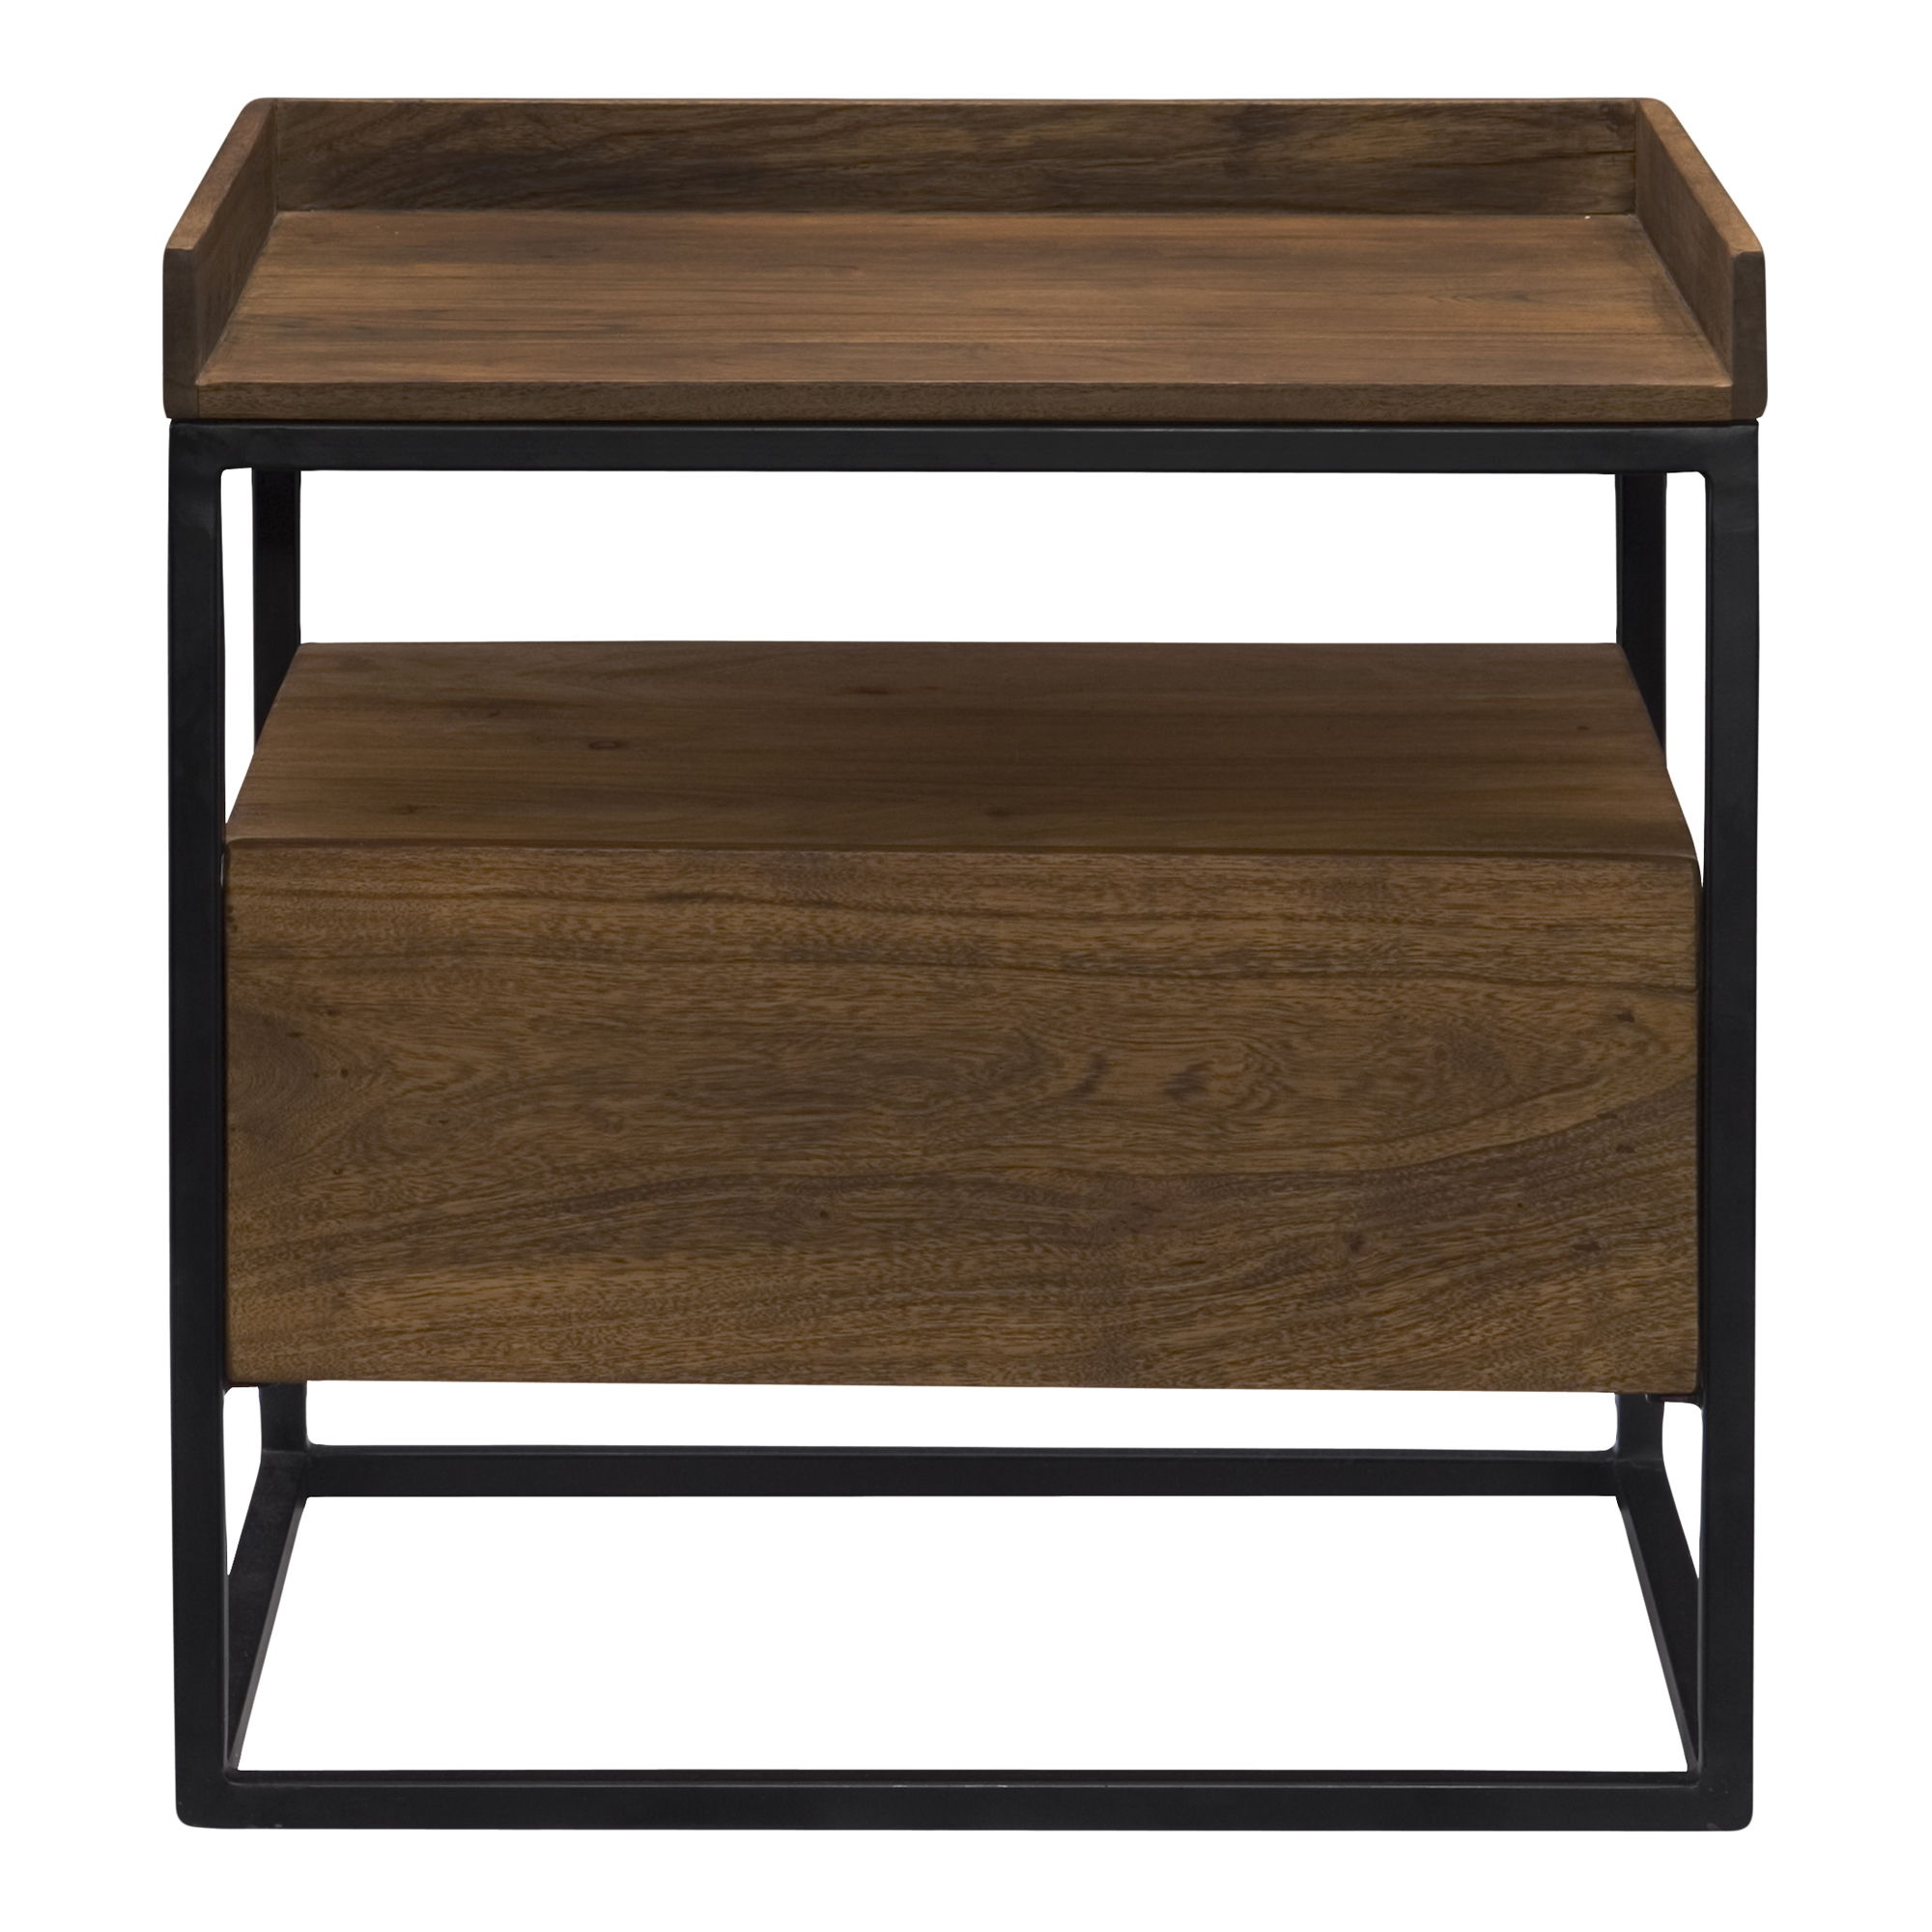 Vancouver - Side Table - Brown